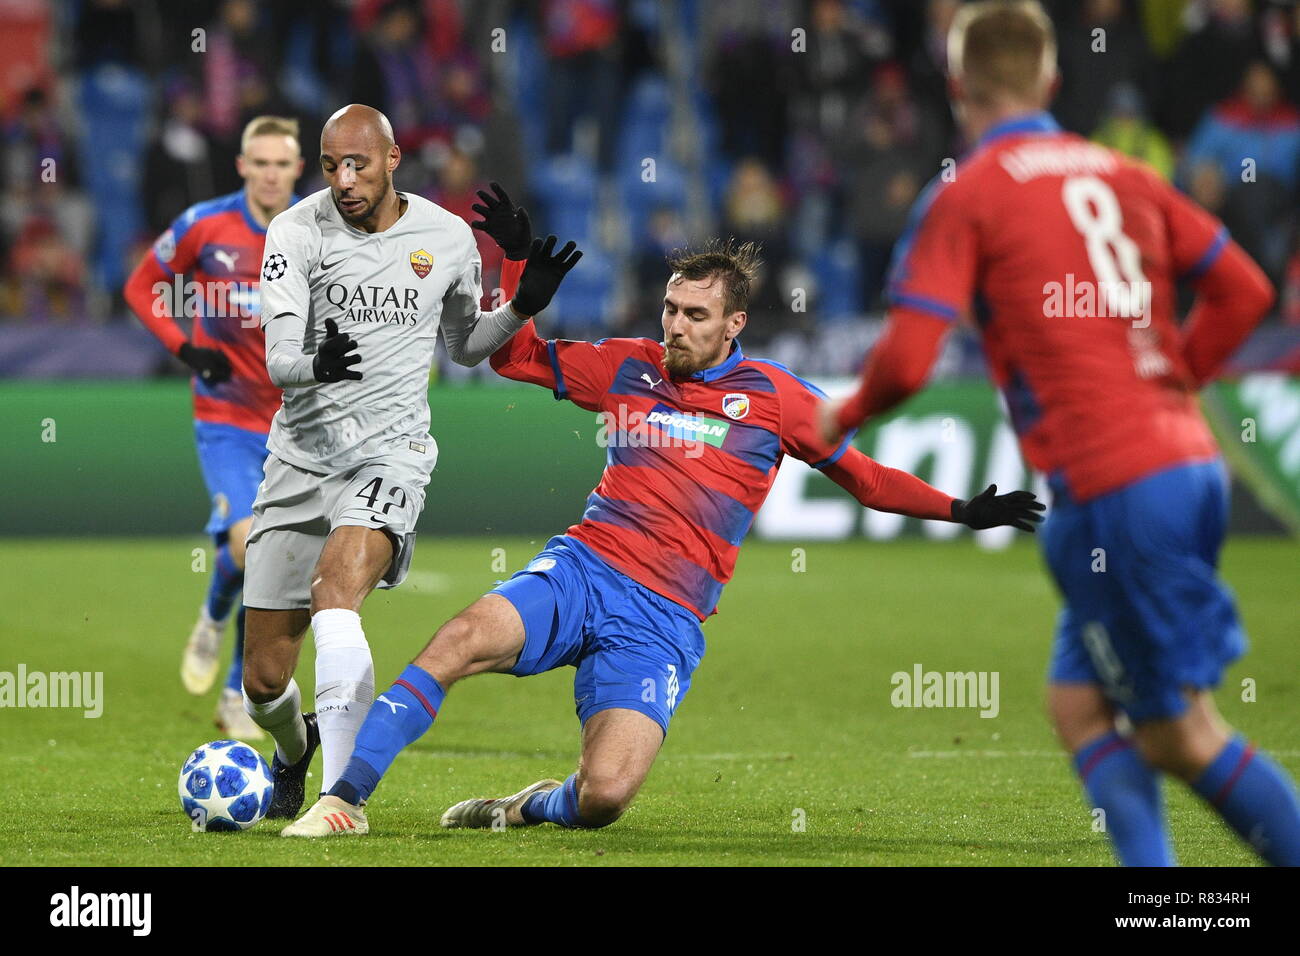 Pilsen, Czech Republic. 12th Dec, 2018. From left STEVEN NZONZI of Rome and TOMAS CHORY of Viktoria in action during the Football Champions League 6th round match: Viktoria Plzen vs AS Roma in Pilsen, Czech Republic, December 12, 2018. Credit: Michal Kamaryt/CTK Photo/Alamy Live News Stock Photo